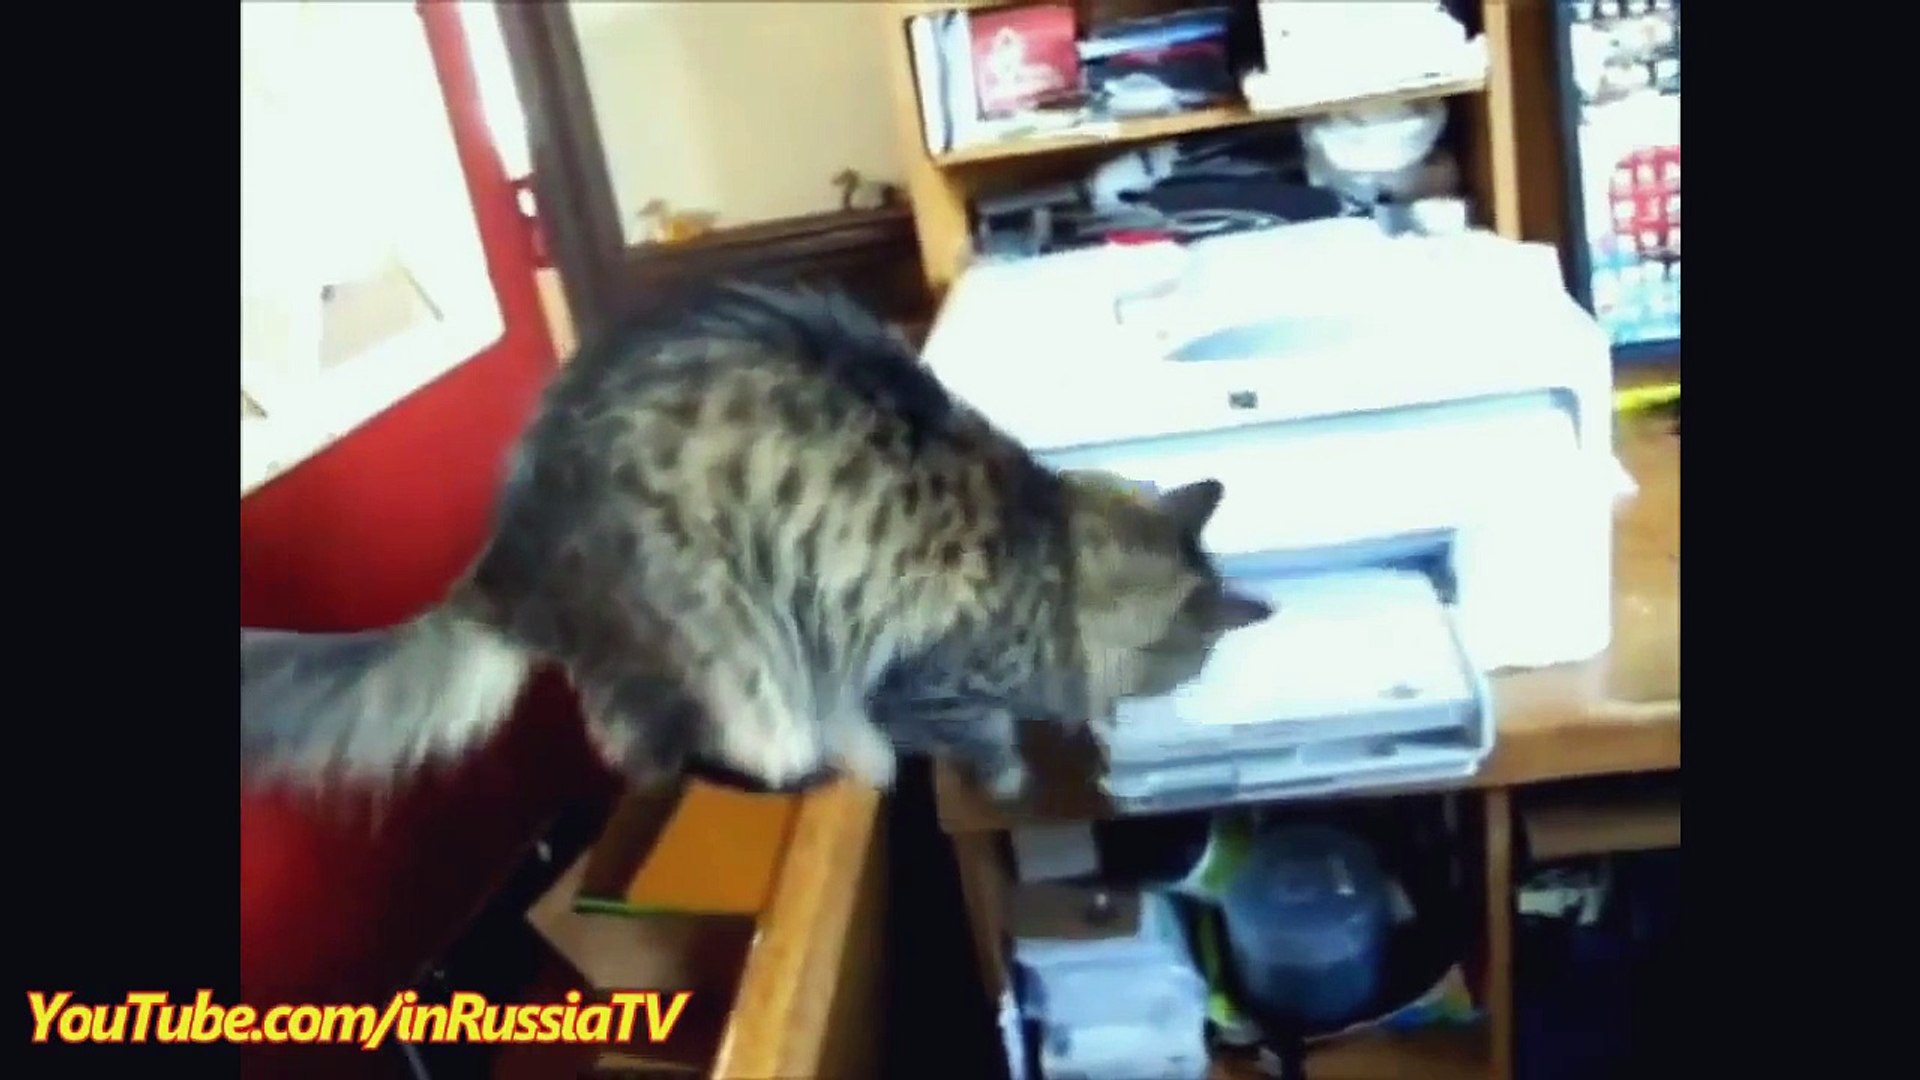 FUNNY CAST - Funny Cats - Funny Animals - Funny Cats vs Printer - Cats Funny Compilation